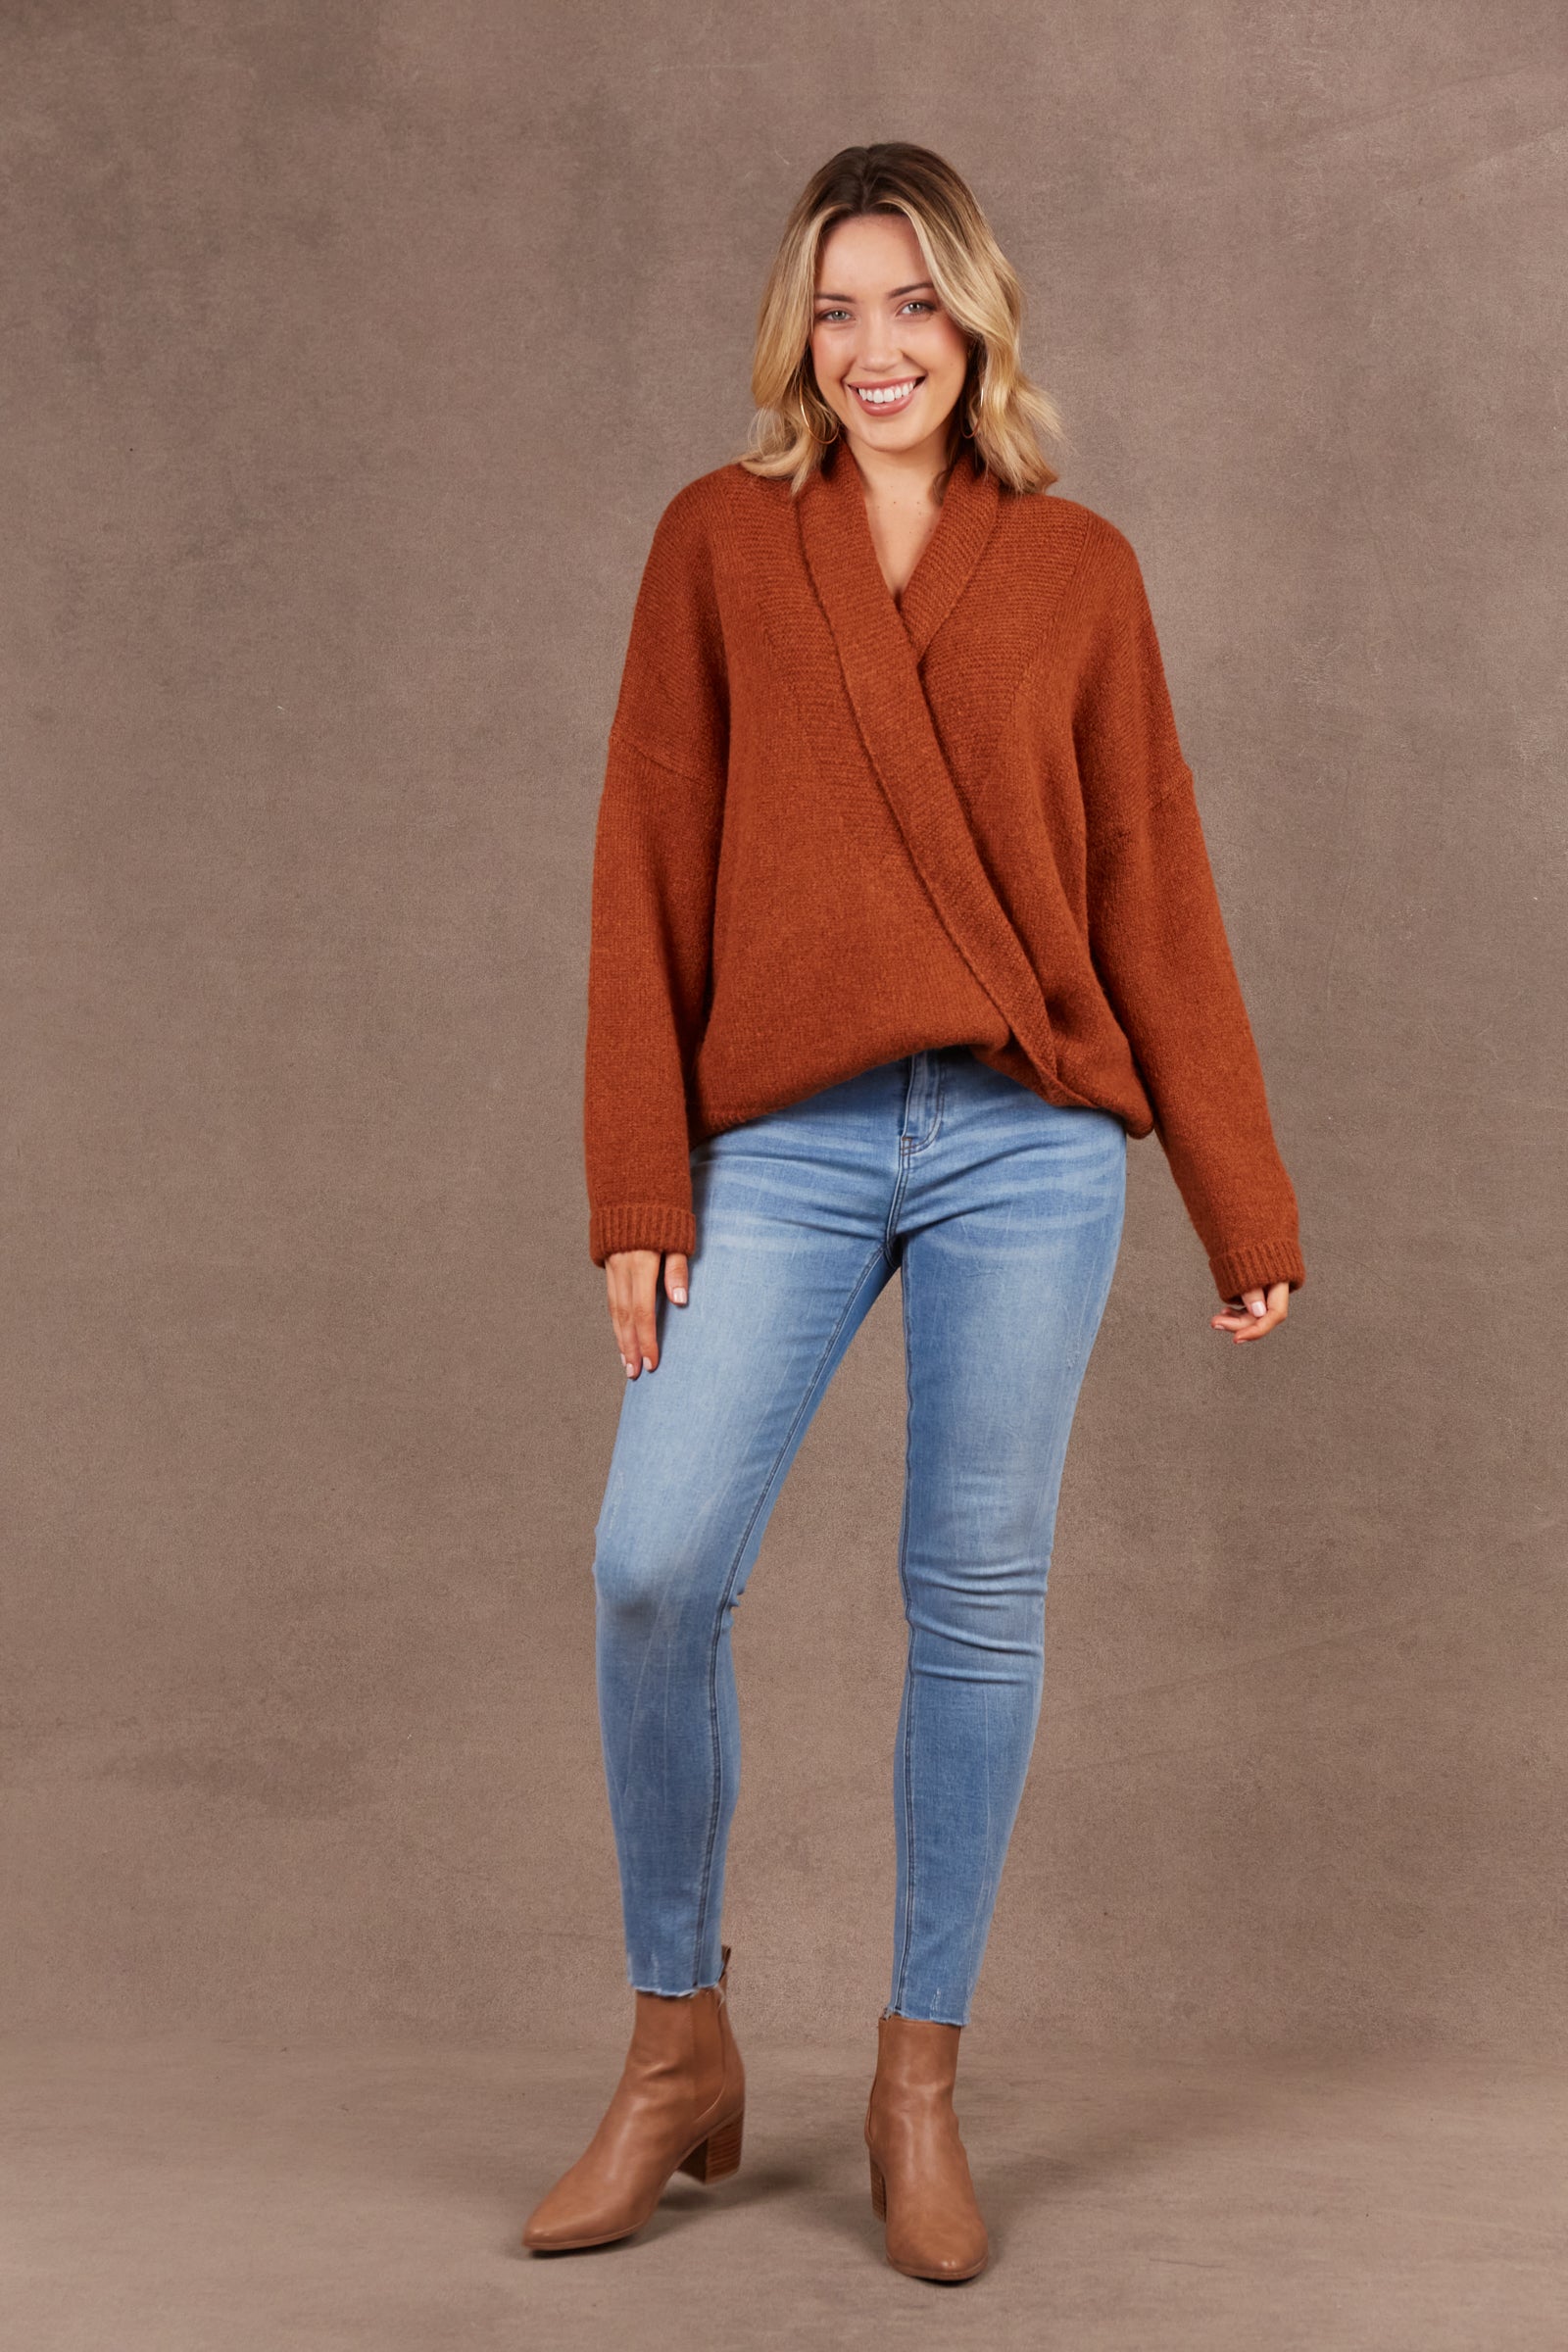 Paarl Crossover Knit - Ochre-Knitwear & Jumpers-Eb & Ive-The Bay Room